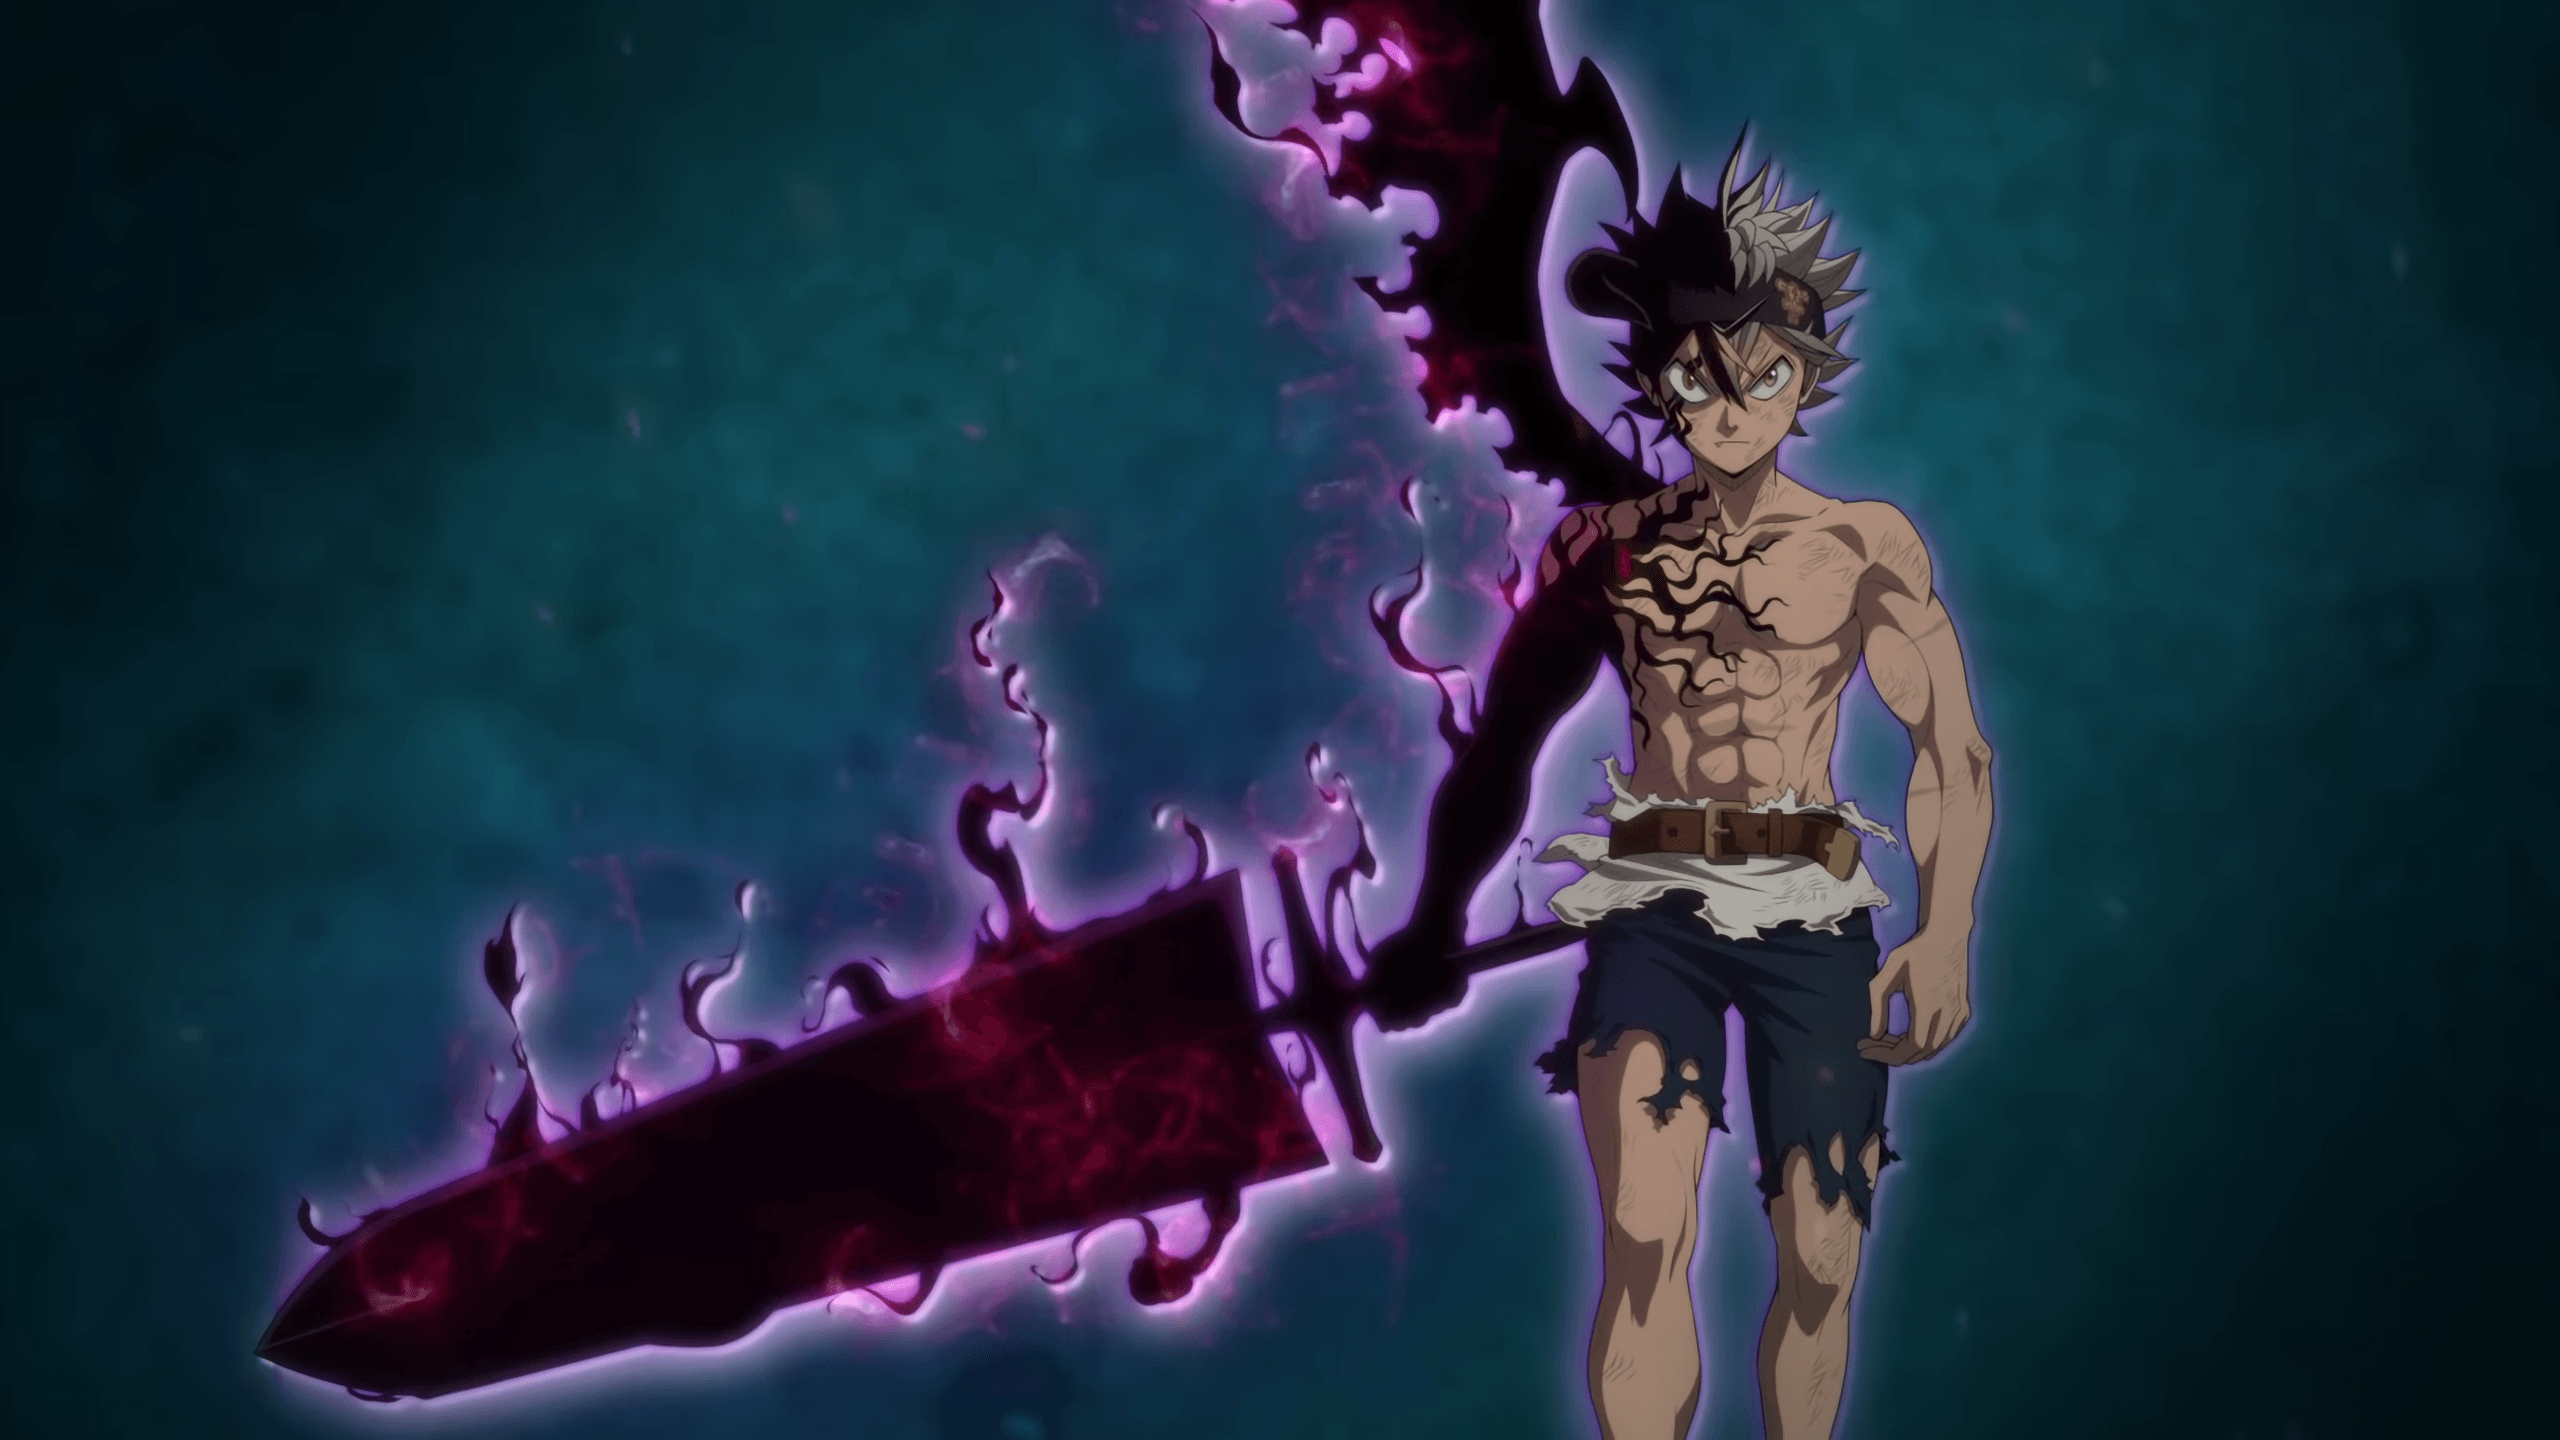 Asta Cool Art Black Clover Wallpaper, HD Anime 4K Wallpapers, Images and  Background - Wallpapers Den